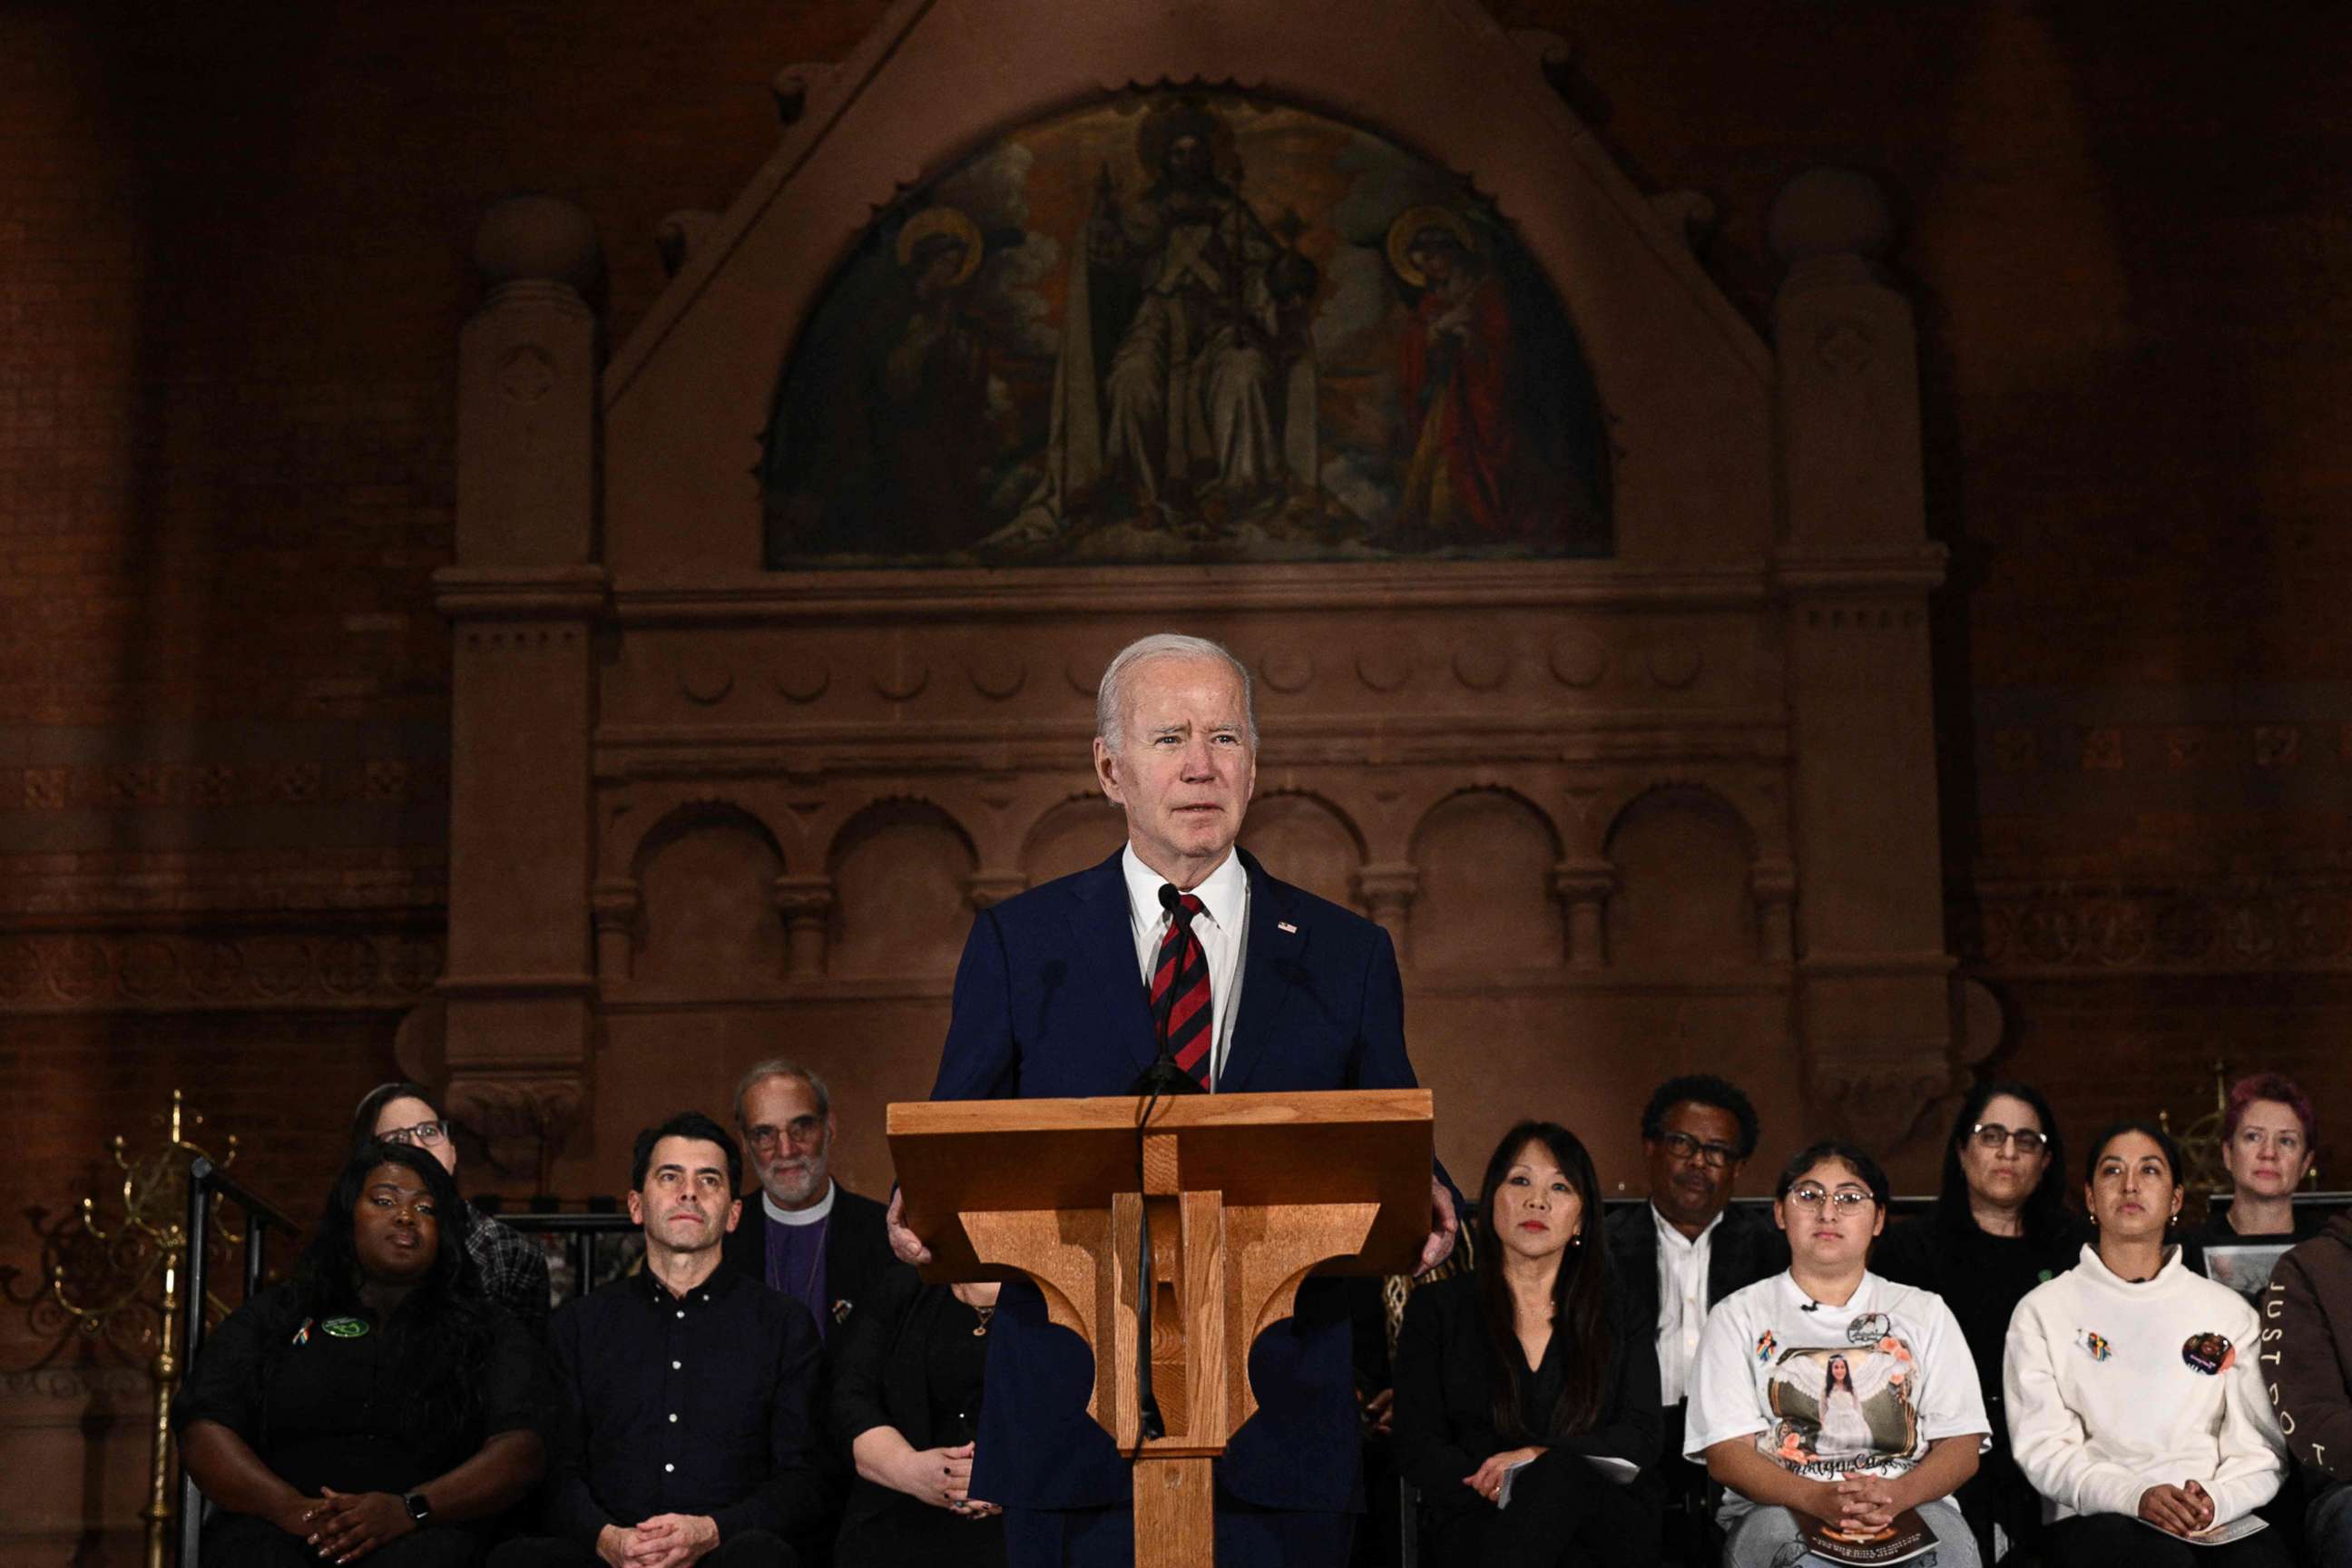 PHOTO: President Joe Biden speaks during the 10th Annual National Vigil for All Victims of Gun Violence at St. Marks Episcopal Church in Washington, D.C., on Dec. 7, 2022.